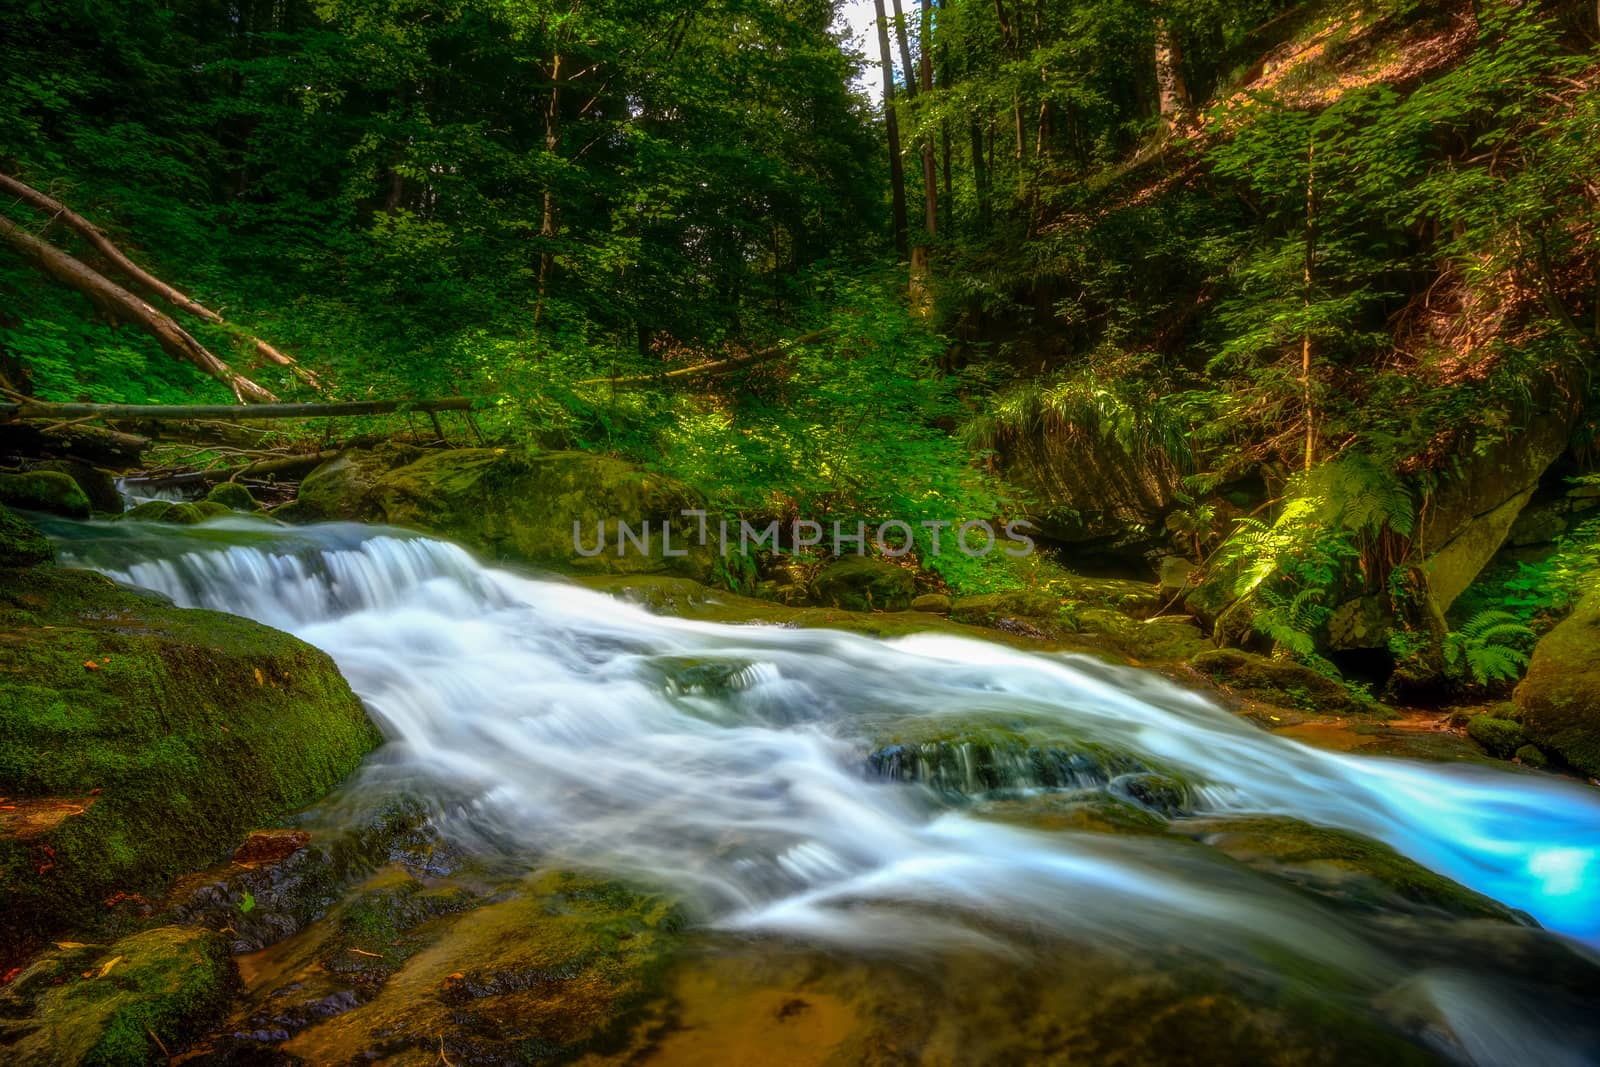 Mountain river - stream flowing through thick green forest. Stream in dense wood. Big boulders in river bed with fallen tree trunks covered in moss, rainforest in Europe, Bistriski Vintgar, Slovenia